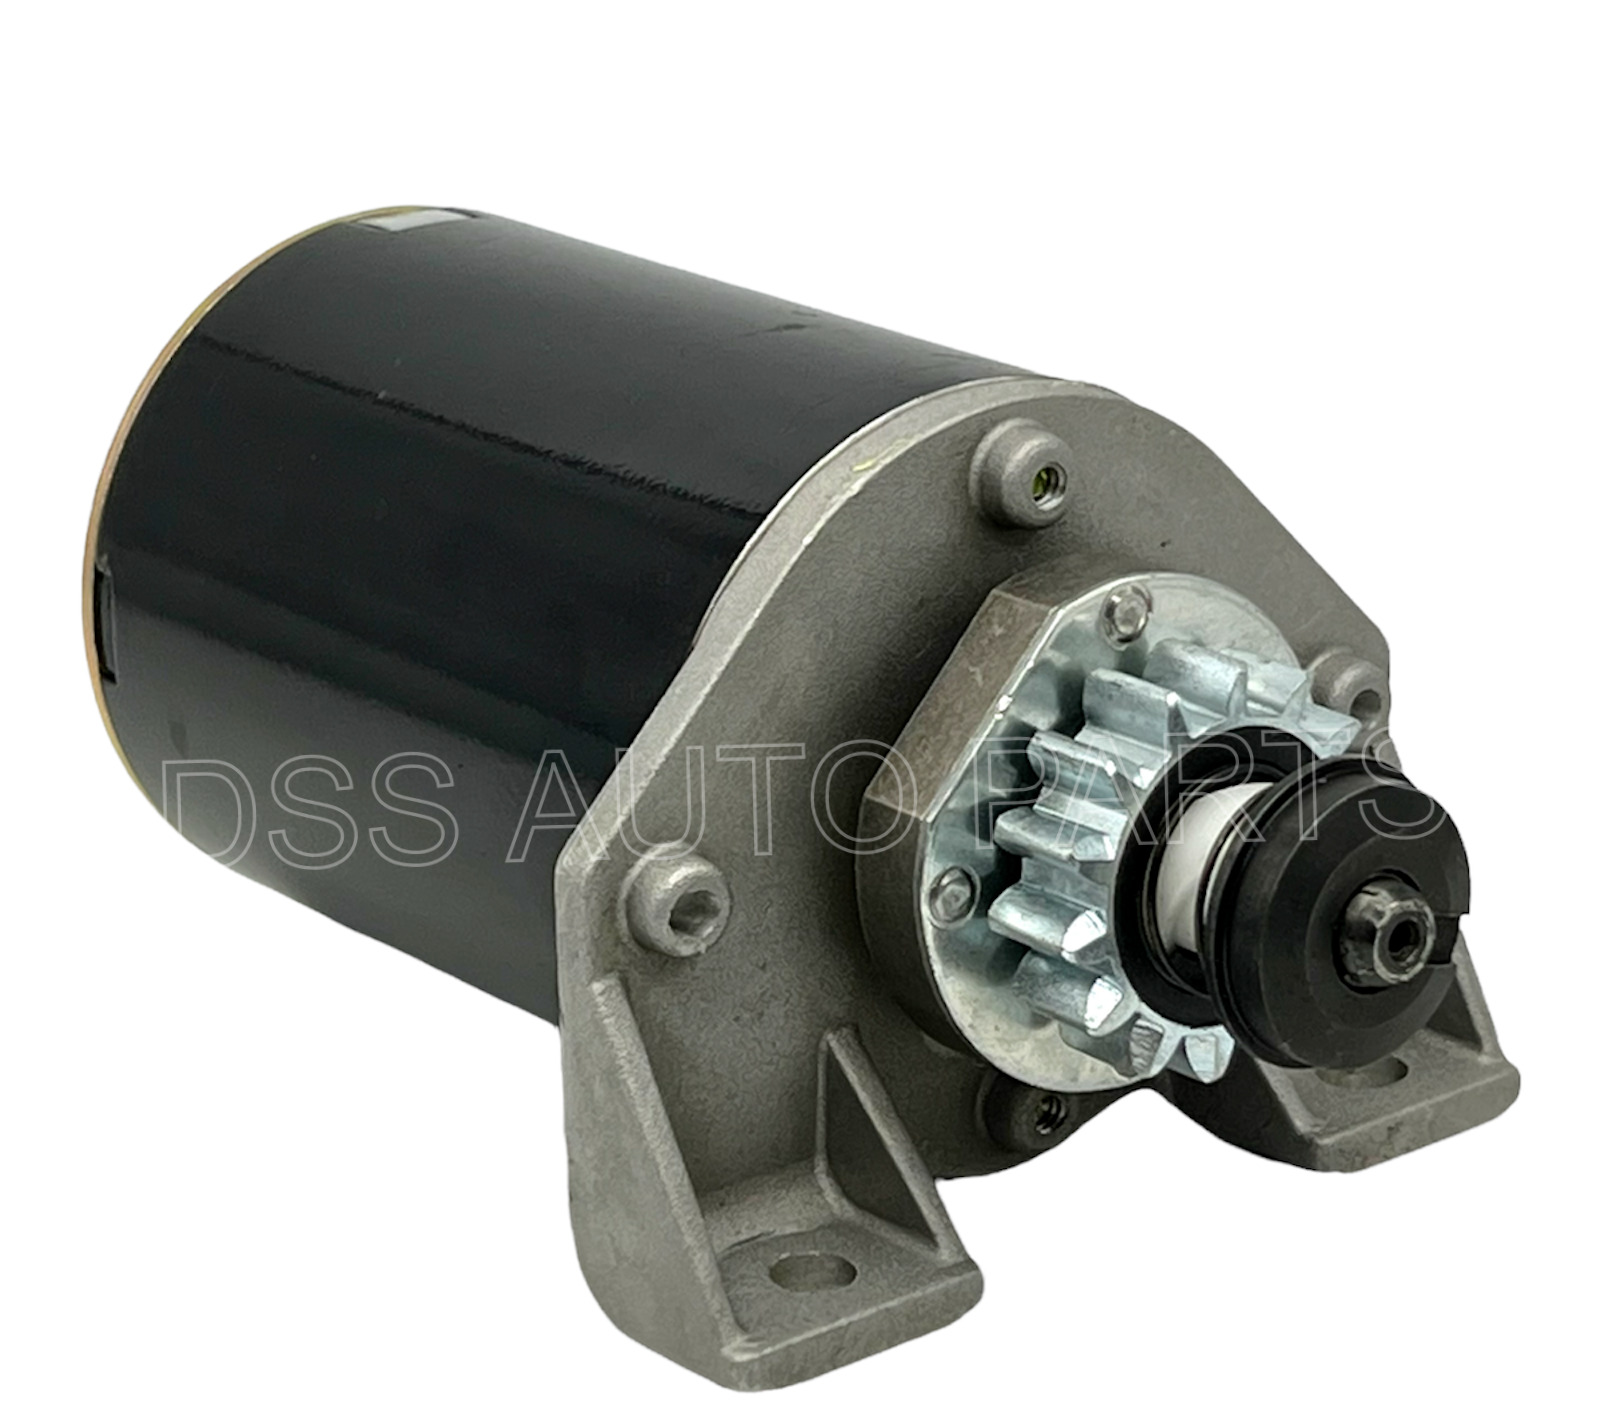 Starter For Briggs & Stratton 20H 20L 20S 20T 21S 21T Series, 695479 SBS0038